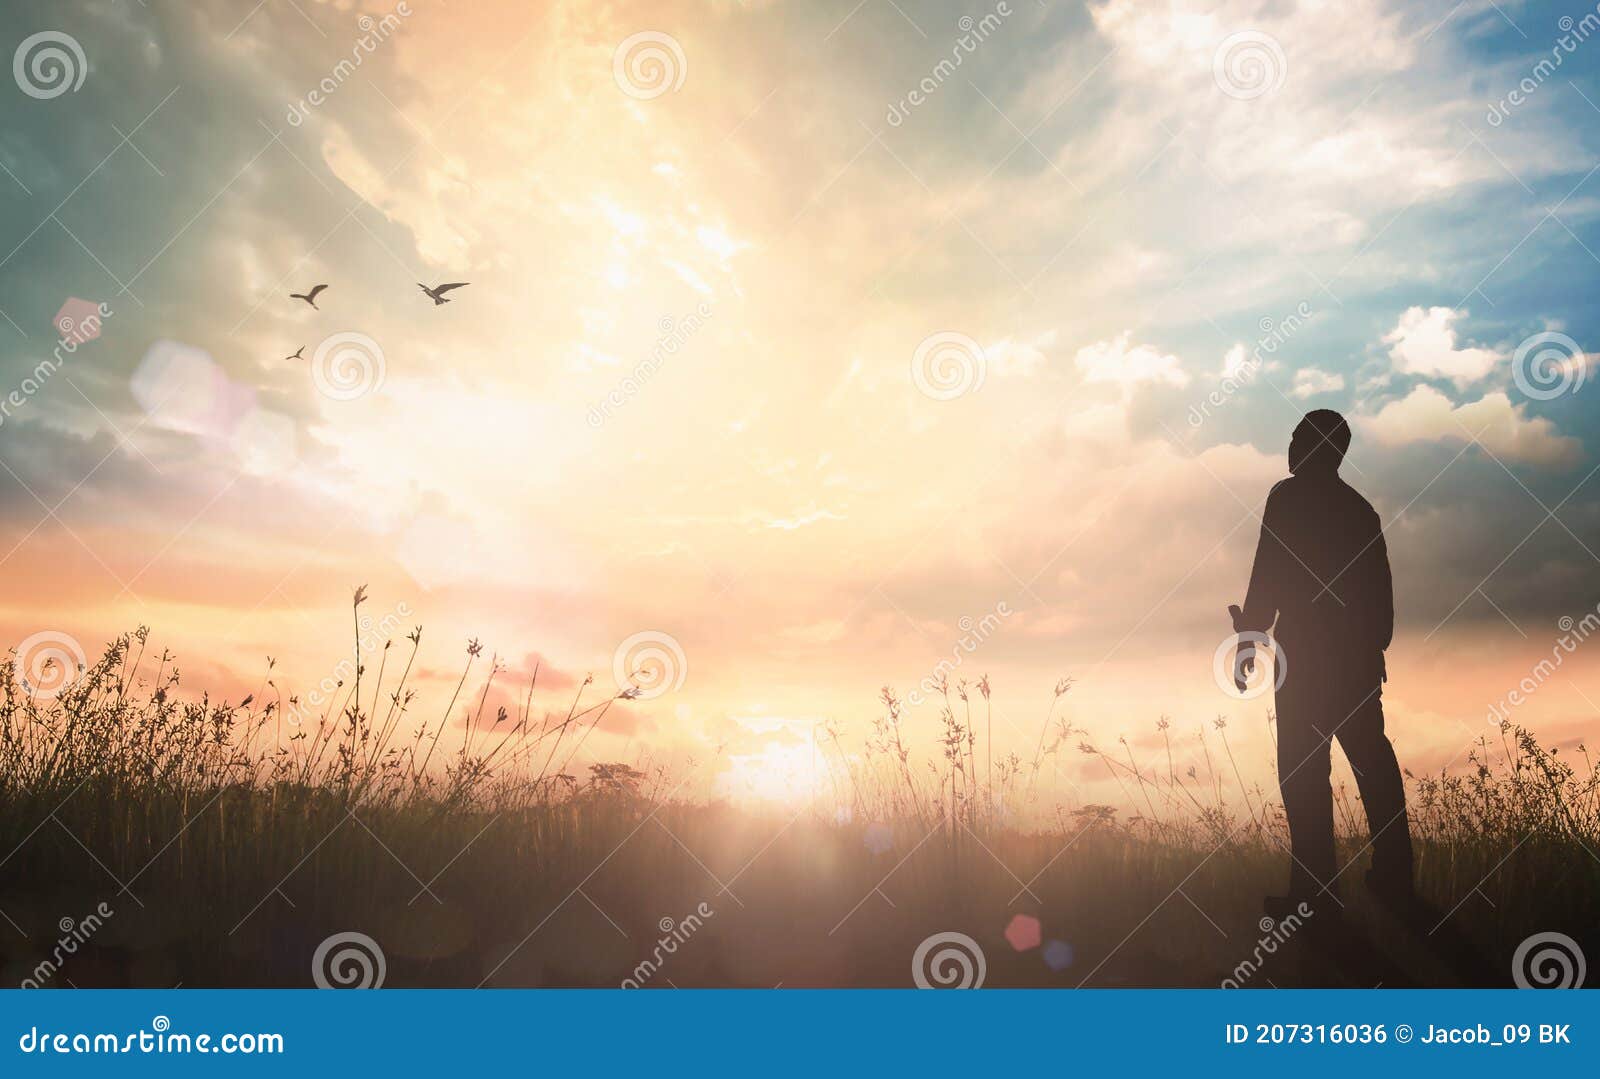 humble man standing on sunlight with meadow autumn sunset